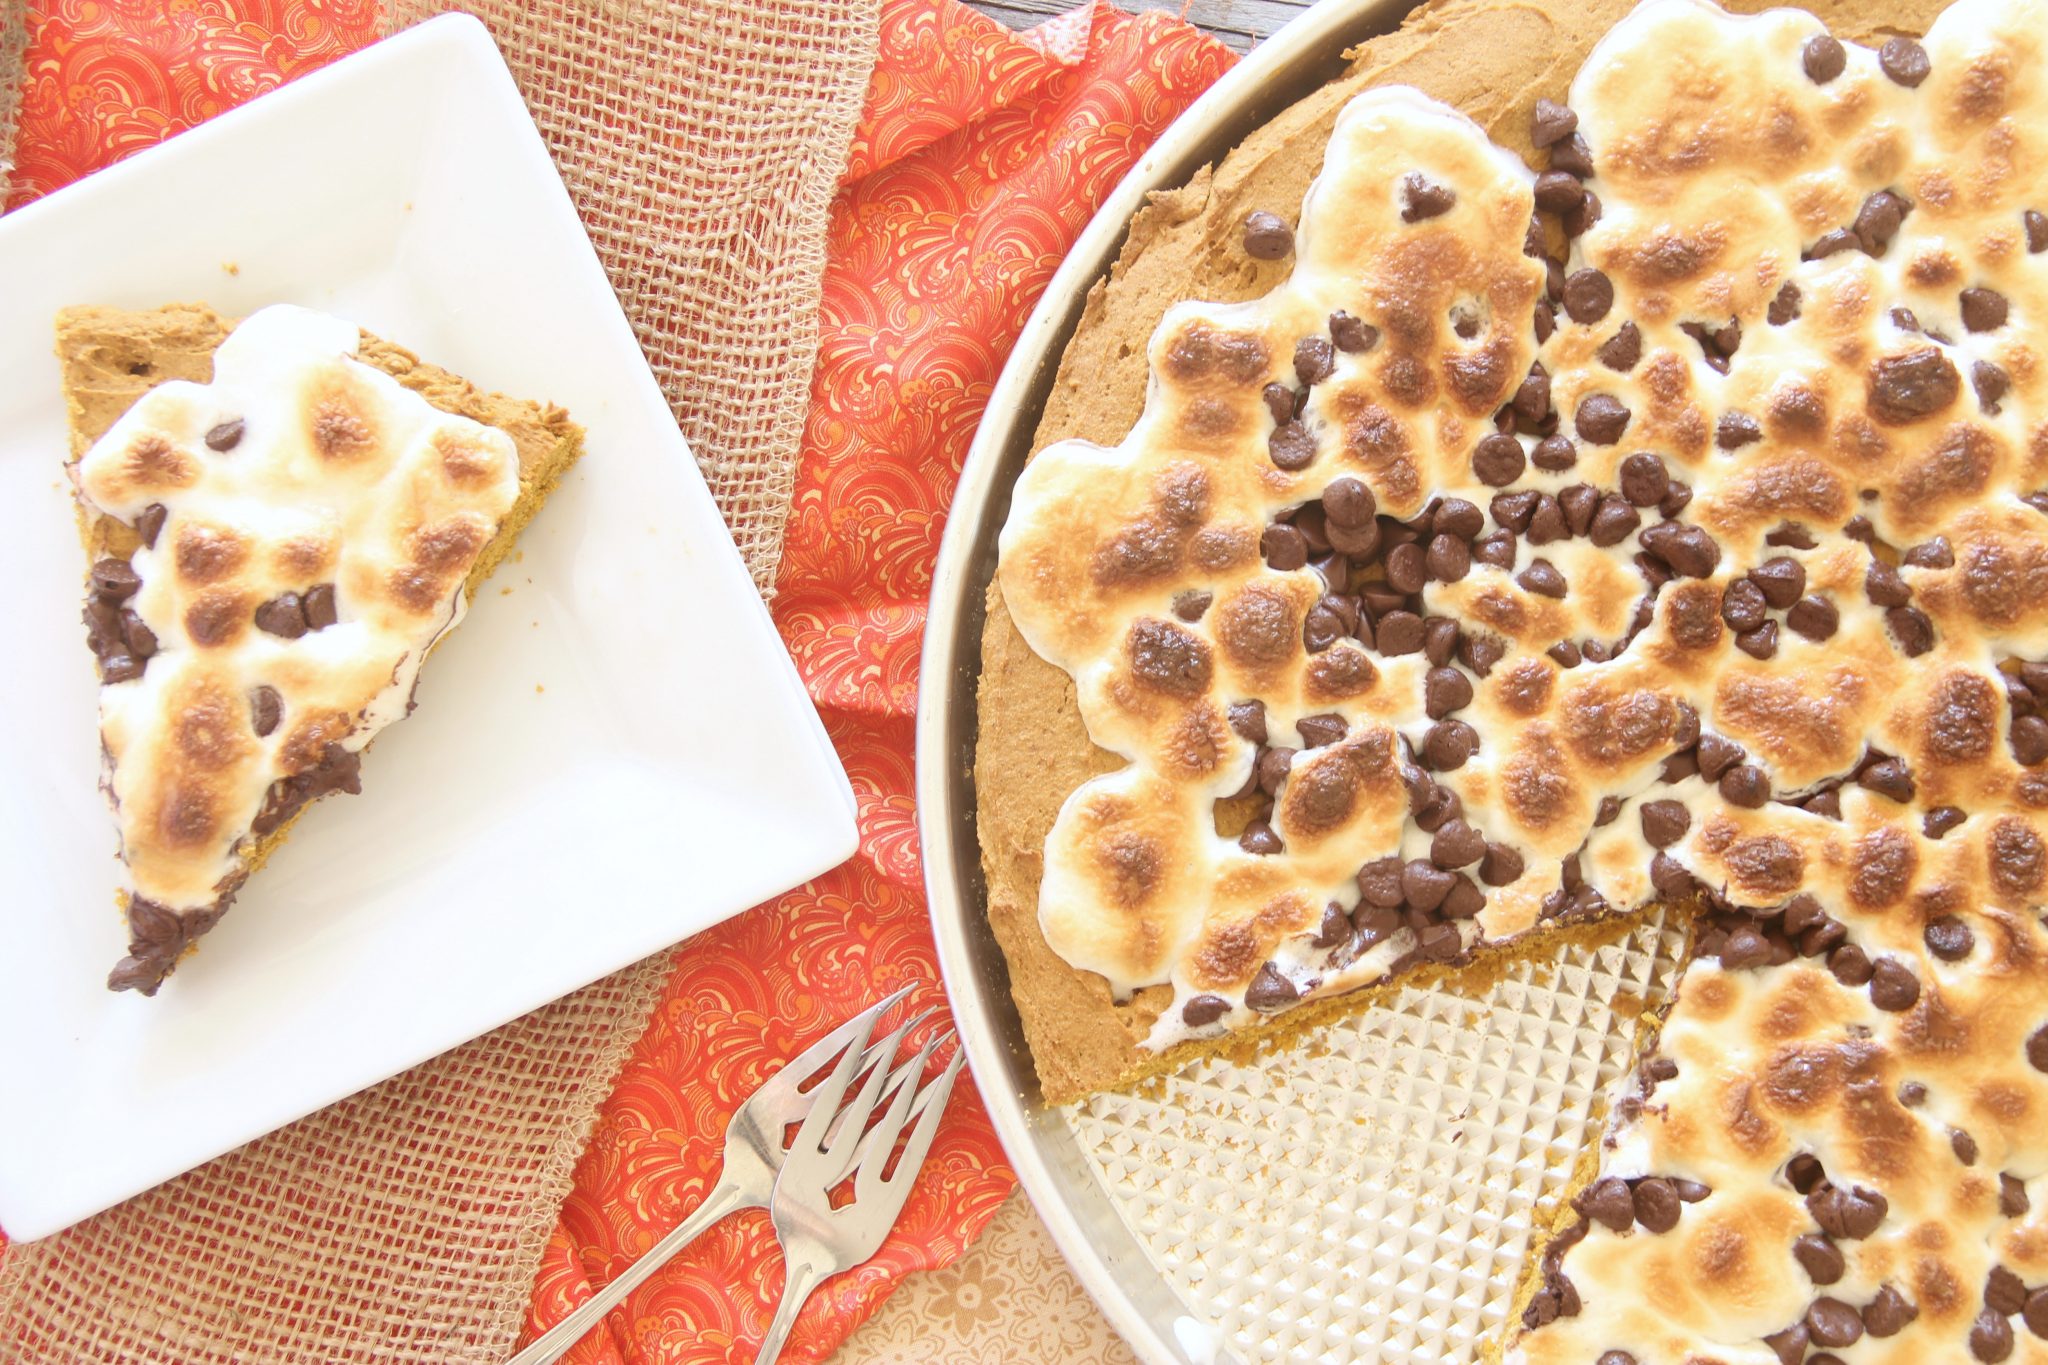 Fall is here and this Pumpkin S'Mores Pizza is scrumptious and the perfect fall dessert! It's such an easy recipe and takes only about 3o minutes!